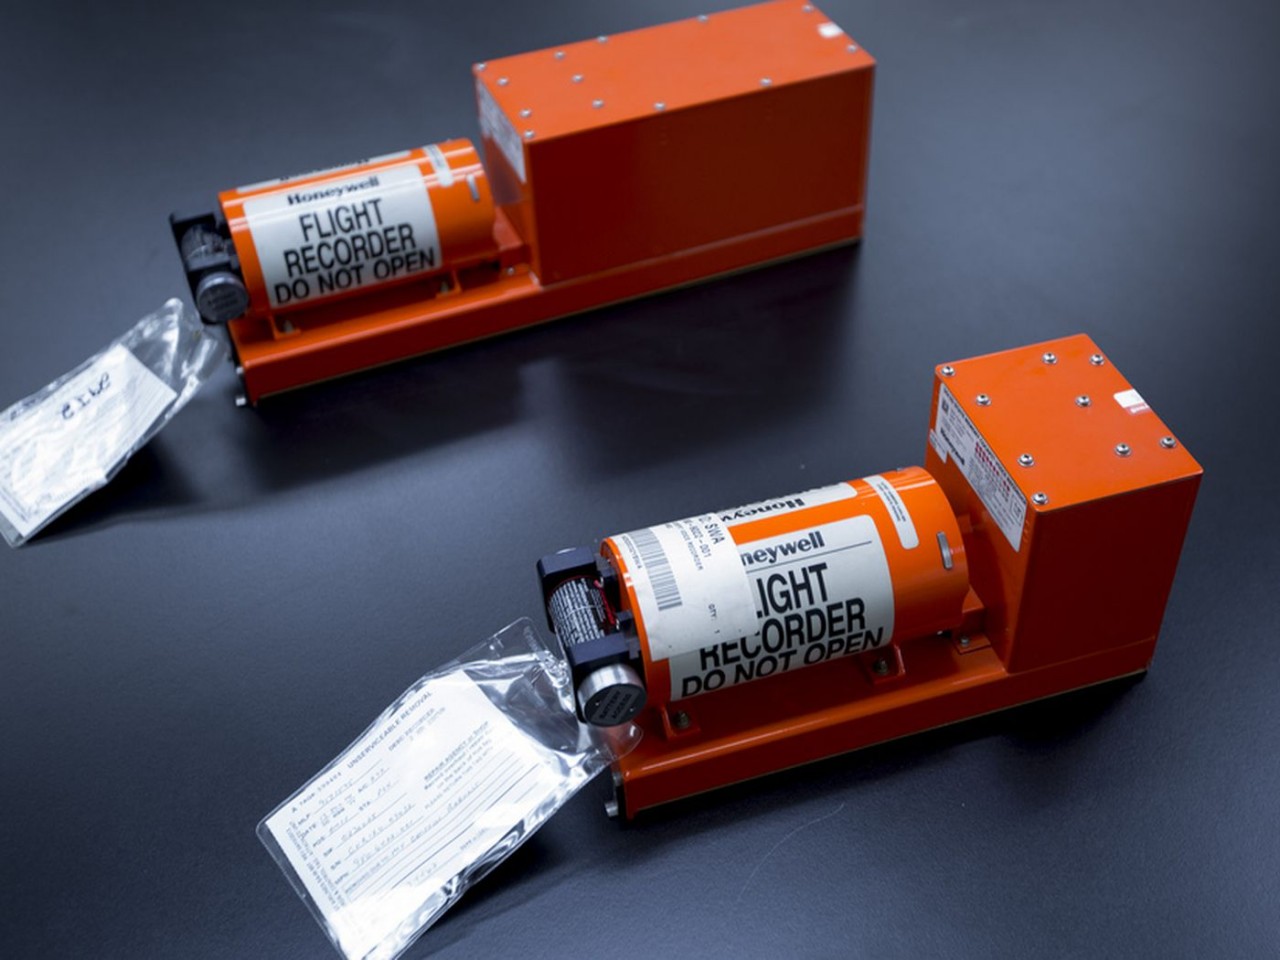 Black box: A device that provides data to decode aviation accidents